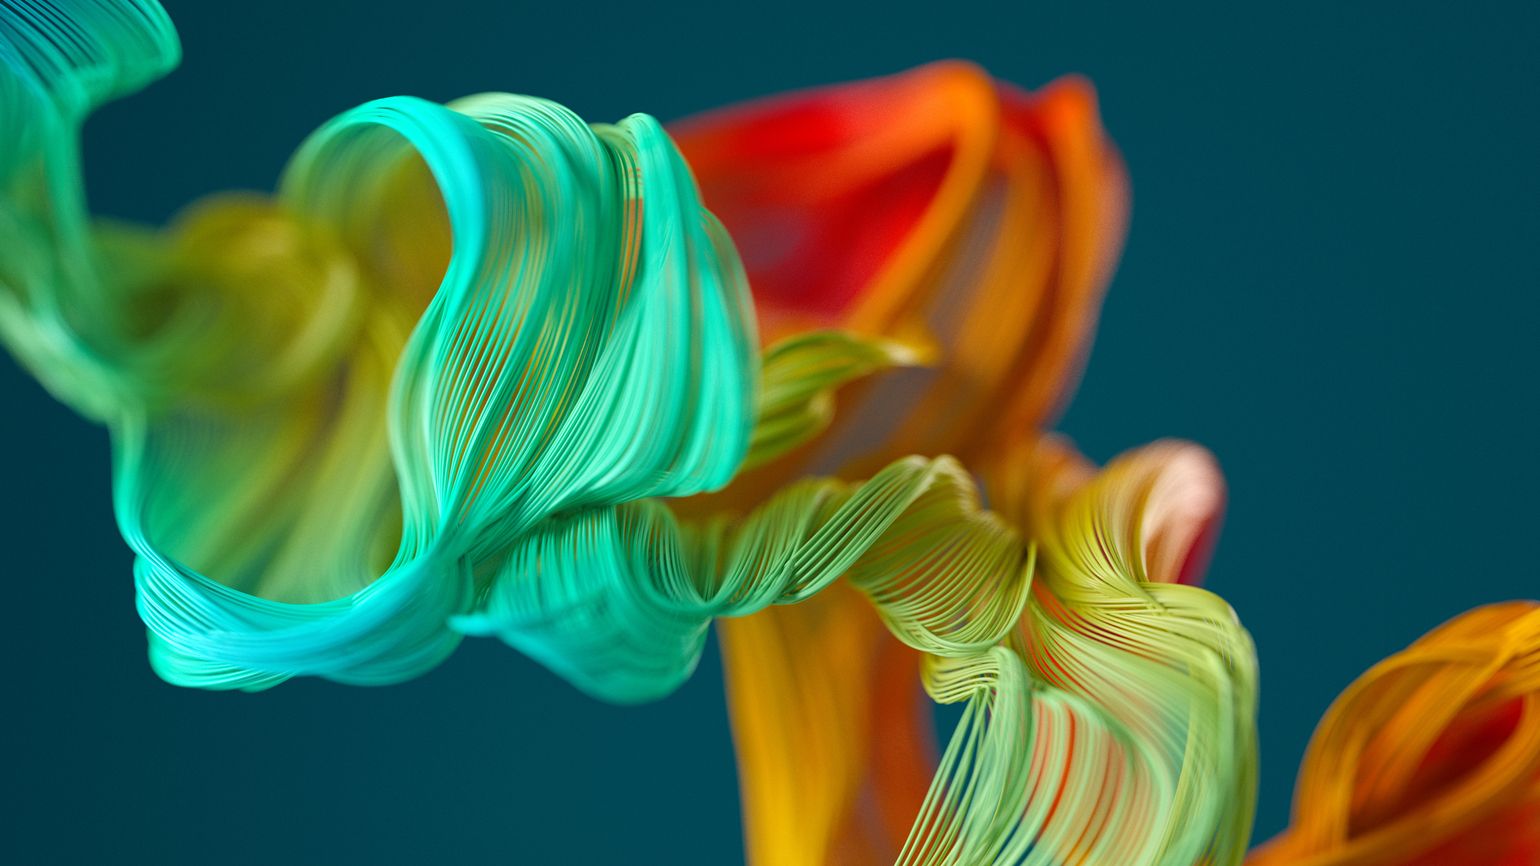 Abstract wavy, colorful object.